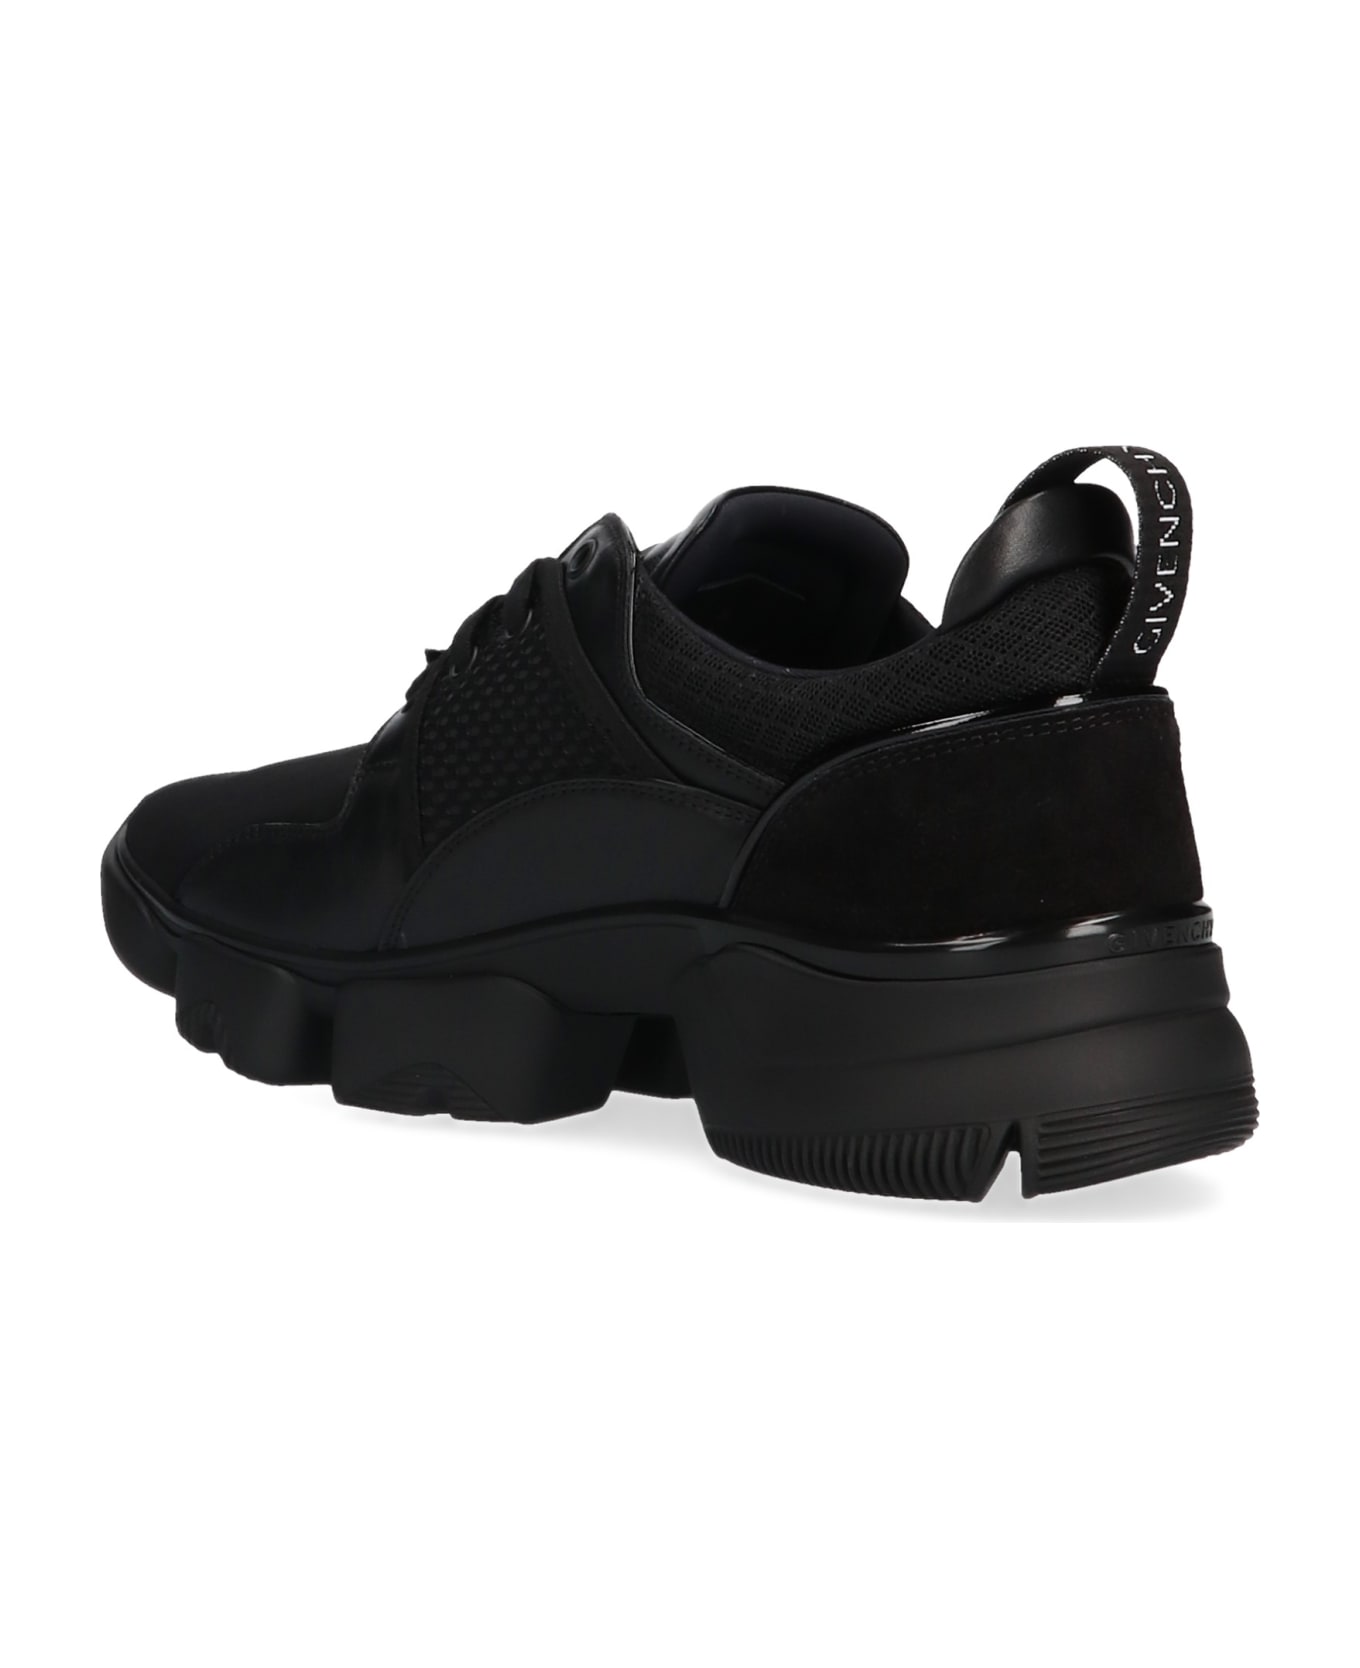 Givenchy 'jaw' Shoes | italist